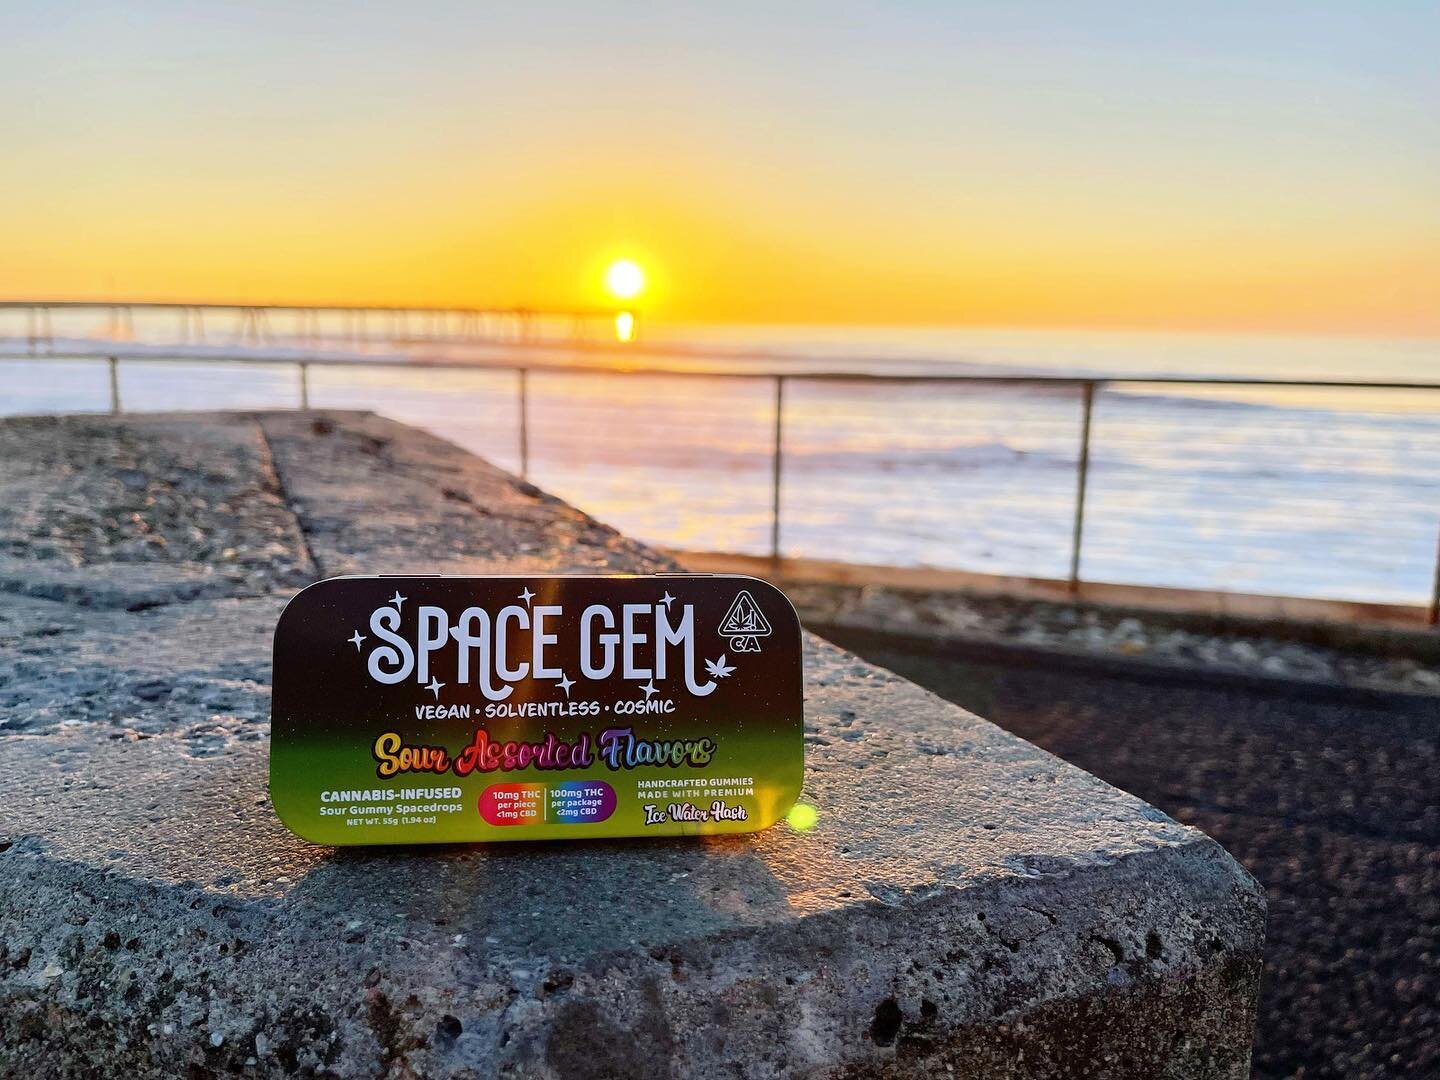 Exclusive to our Pacifica Location 🤩@space_gem_ca🤩
Made with Premium Ice Water Hash for a euphoric entourage effect like no other, in a variety of tasty flavors
🍎🍌🍓🍇🍊🫐🍋
#bloomroomdispensaries #spacegem #edible #veganedible #womenowned